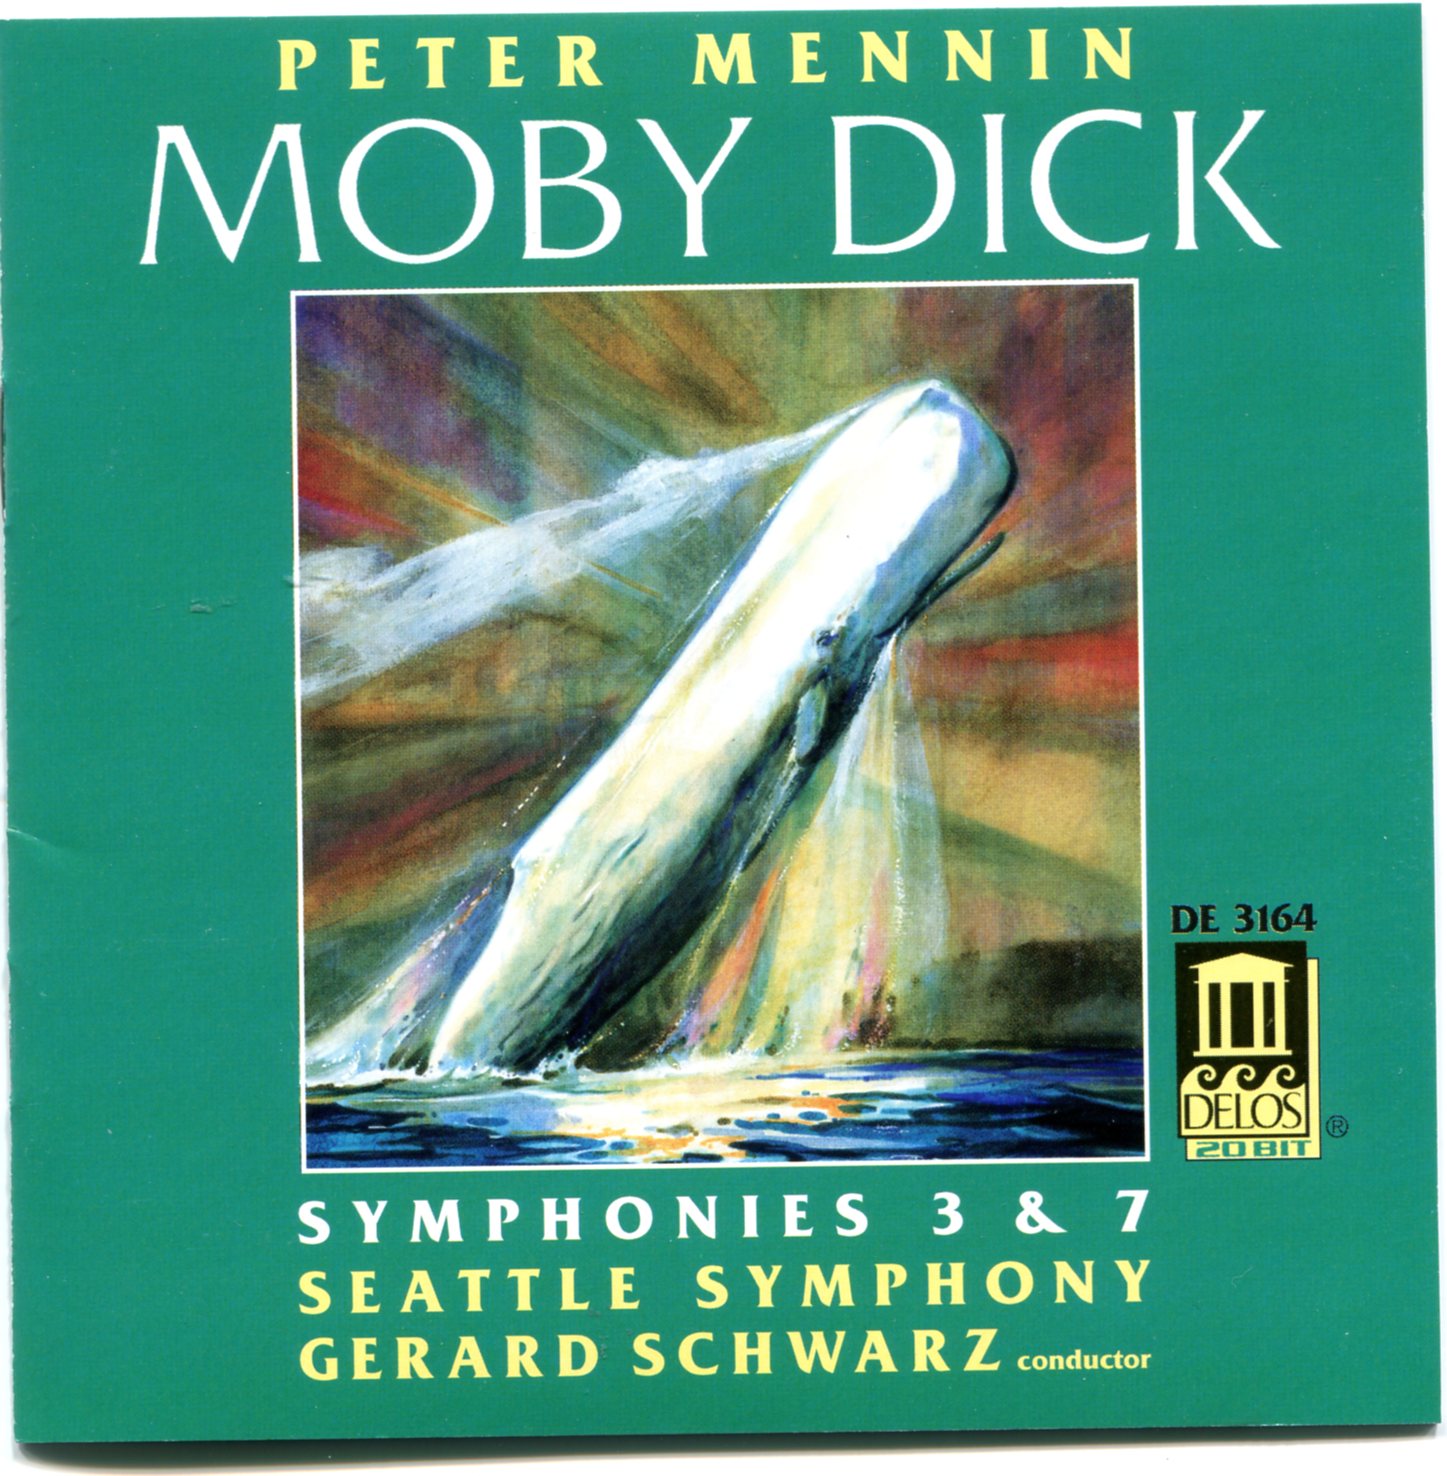 Moby dick in classical music